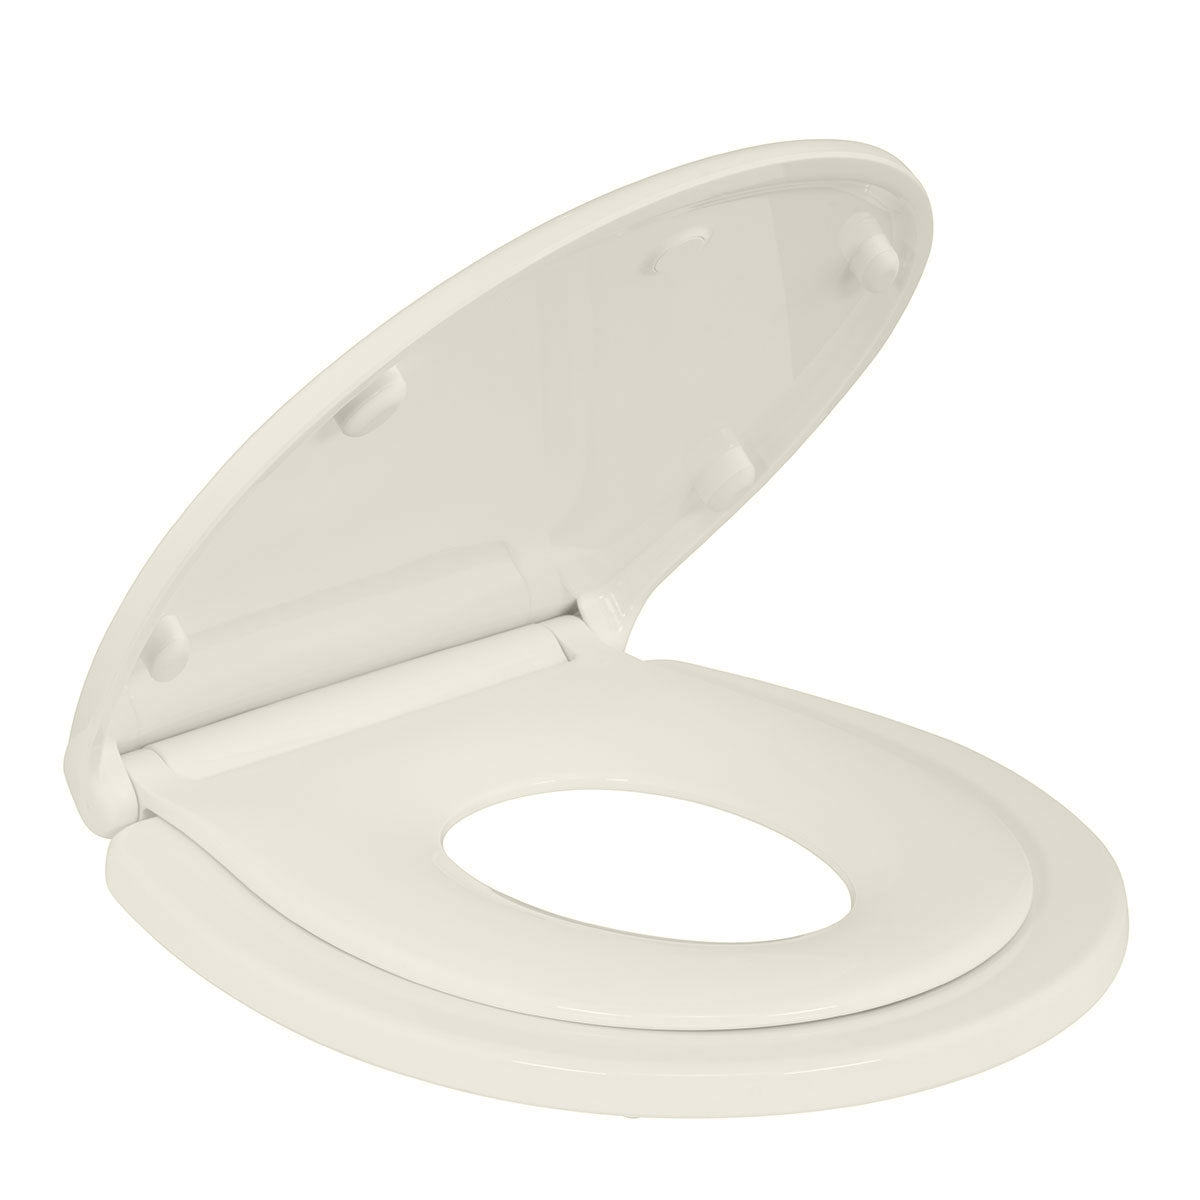 Biscuit/Linen Round Kingsport Family Toilet Seat with Built-In Child Seat